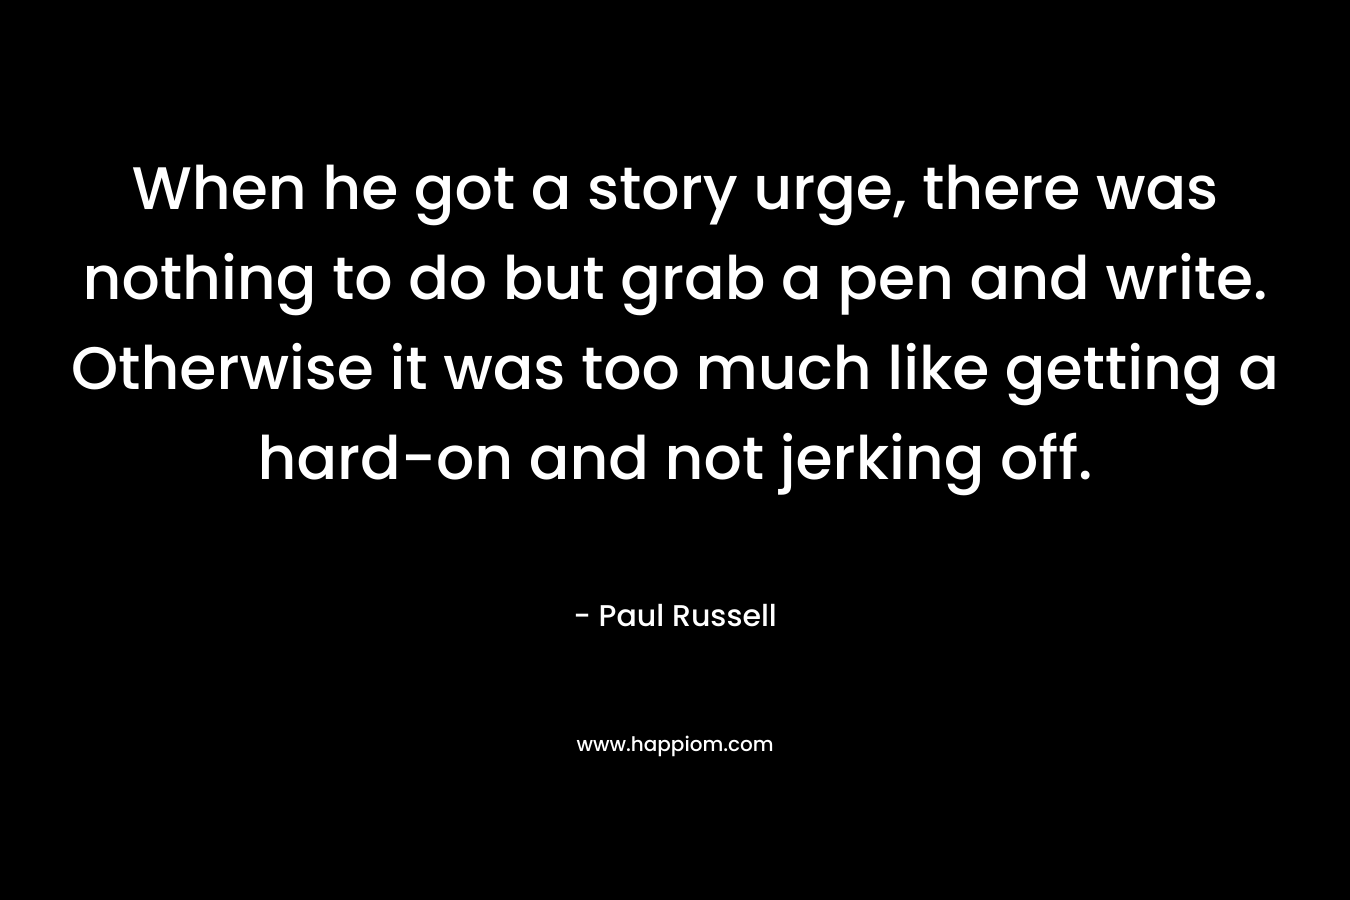 When he got a story urge, there was nothing to do but grab a pen and write. Otherwise it was too much like getting a hard-on and not jerking off.